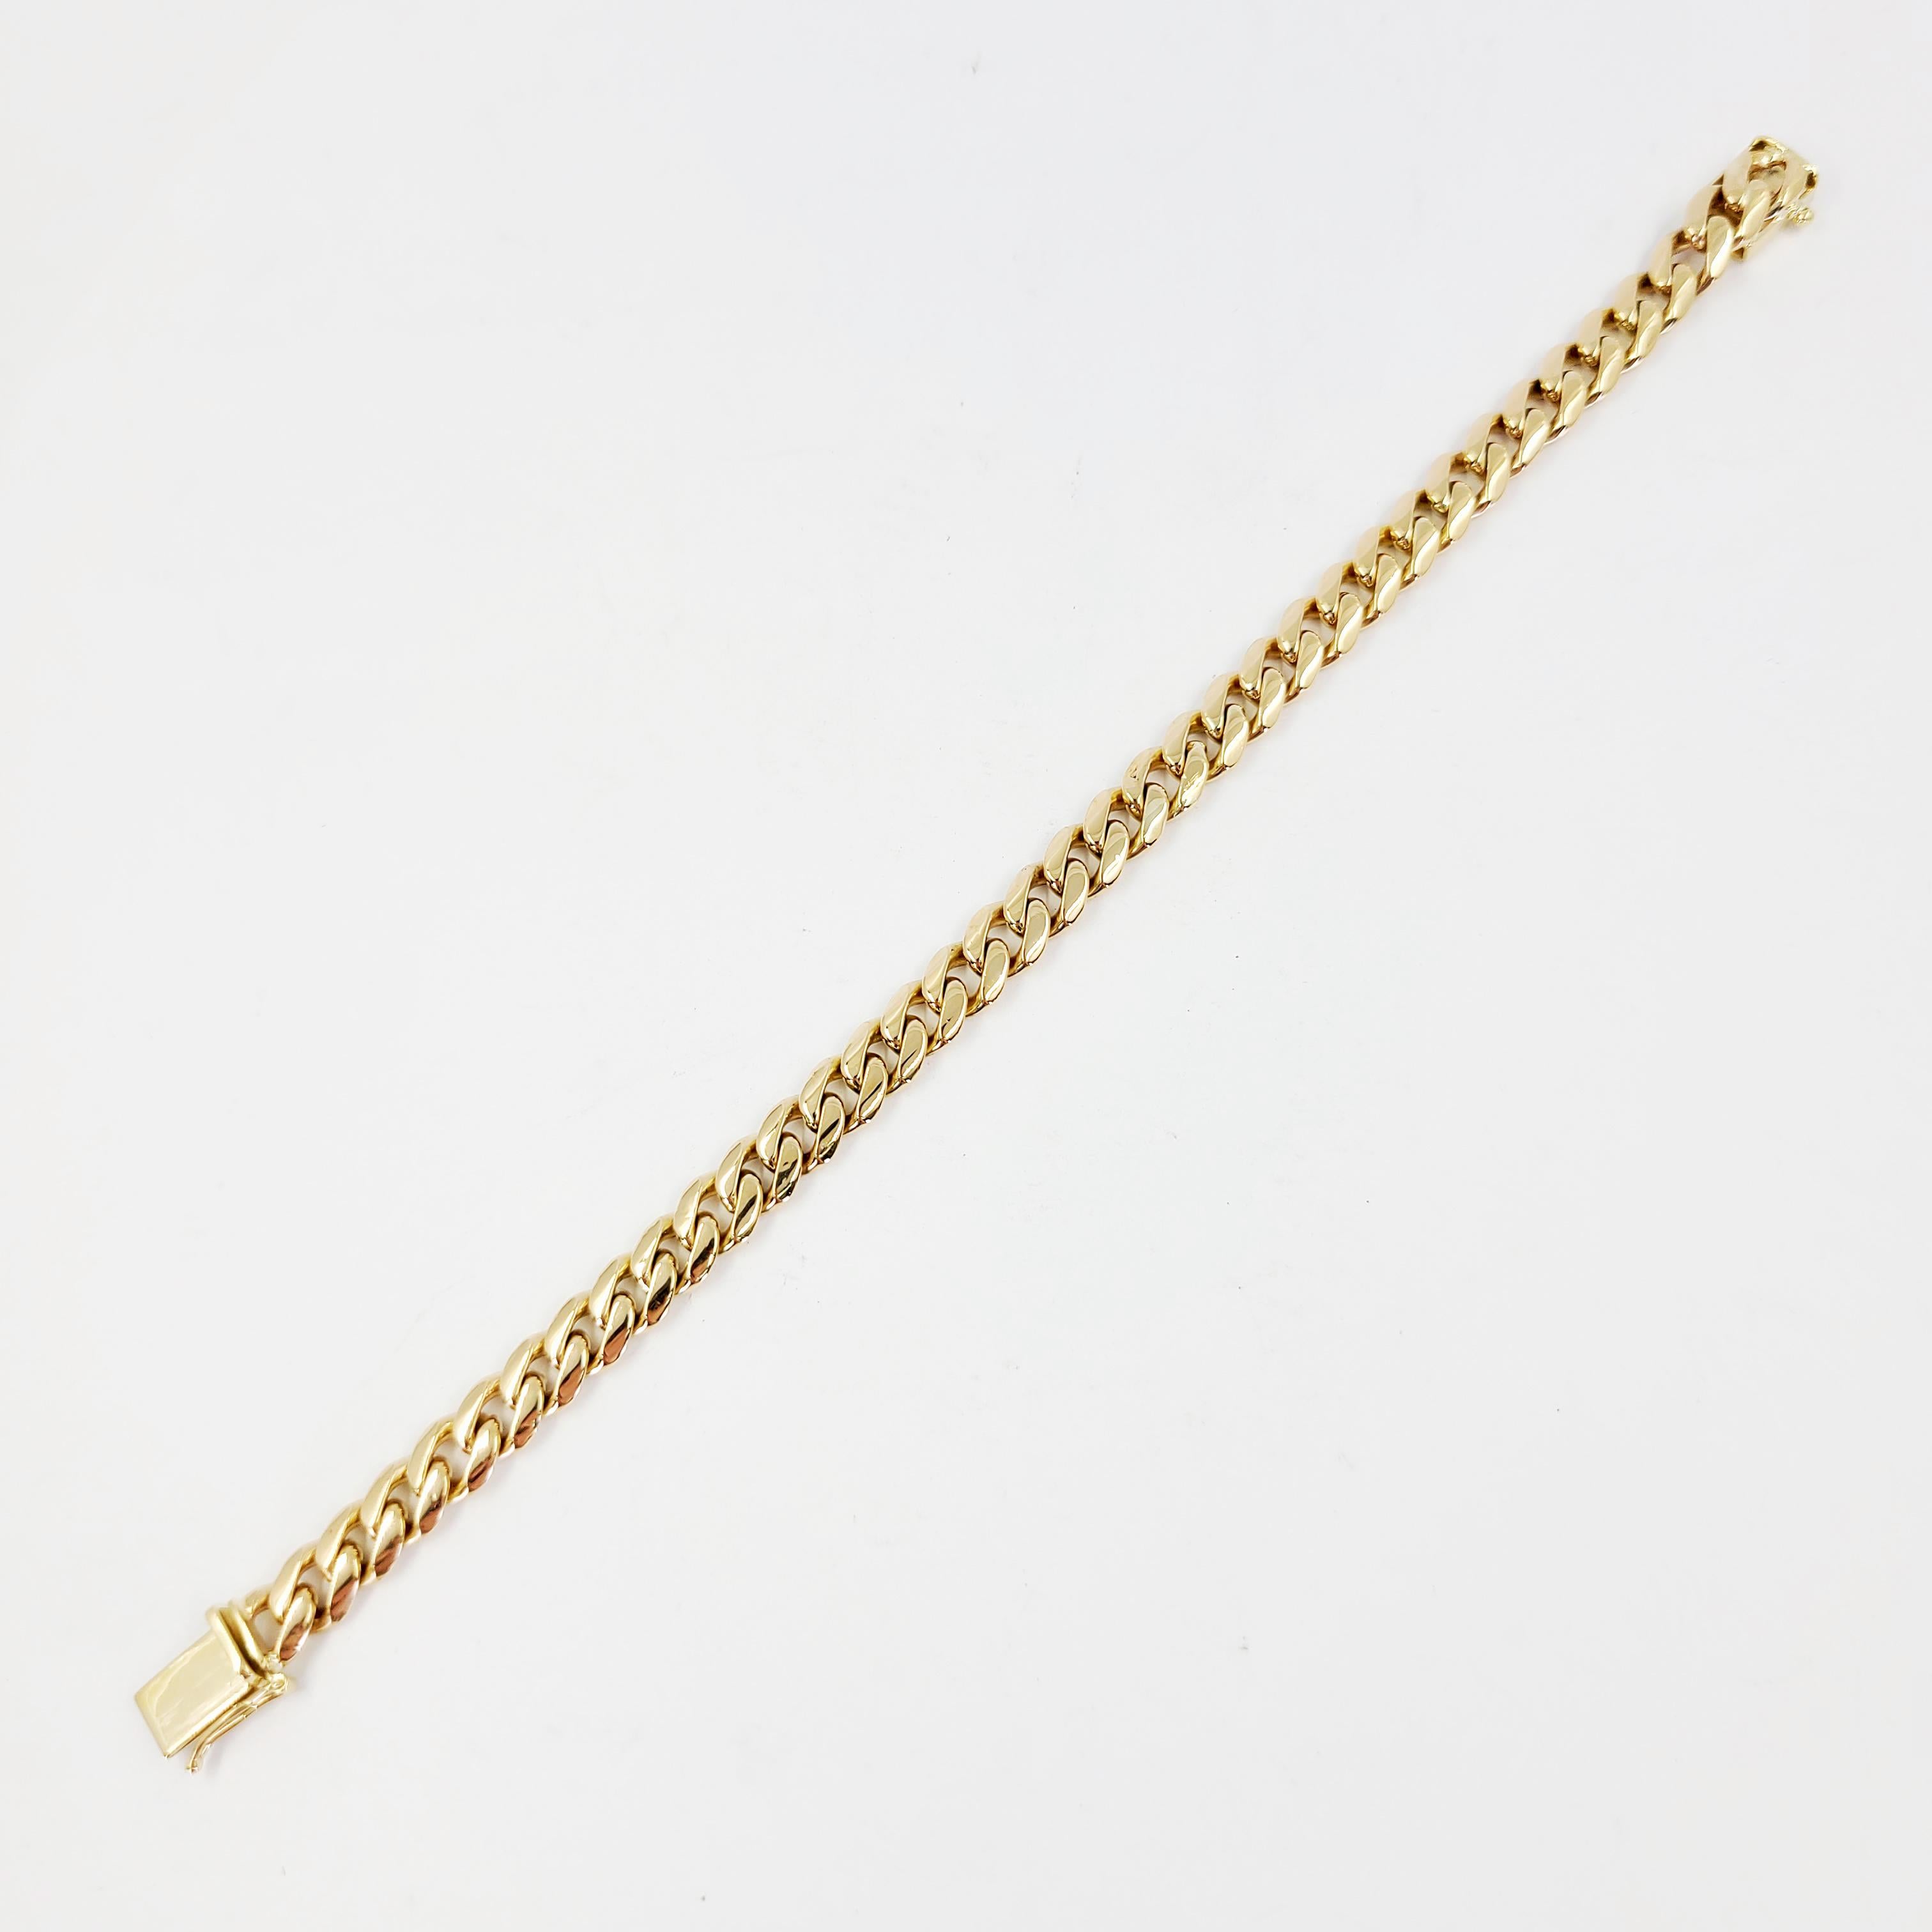 14 Karat Yellow Gold 6.5mm Cuban Chain Bracelet Measuring 7 Inches Long. Box Clasp With Figure 8 Safety. Finished Weight Is 22.6 Grams.